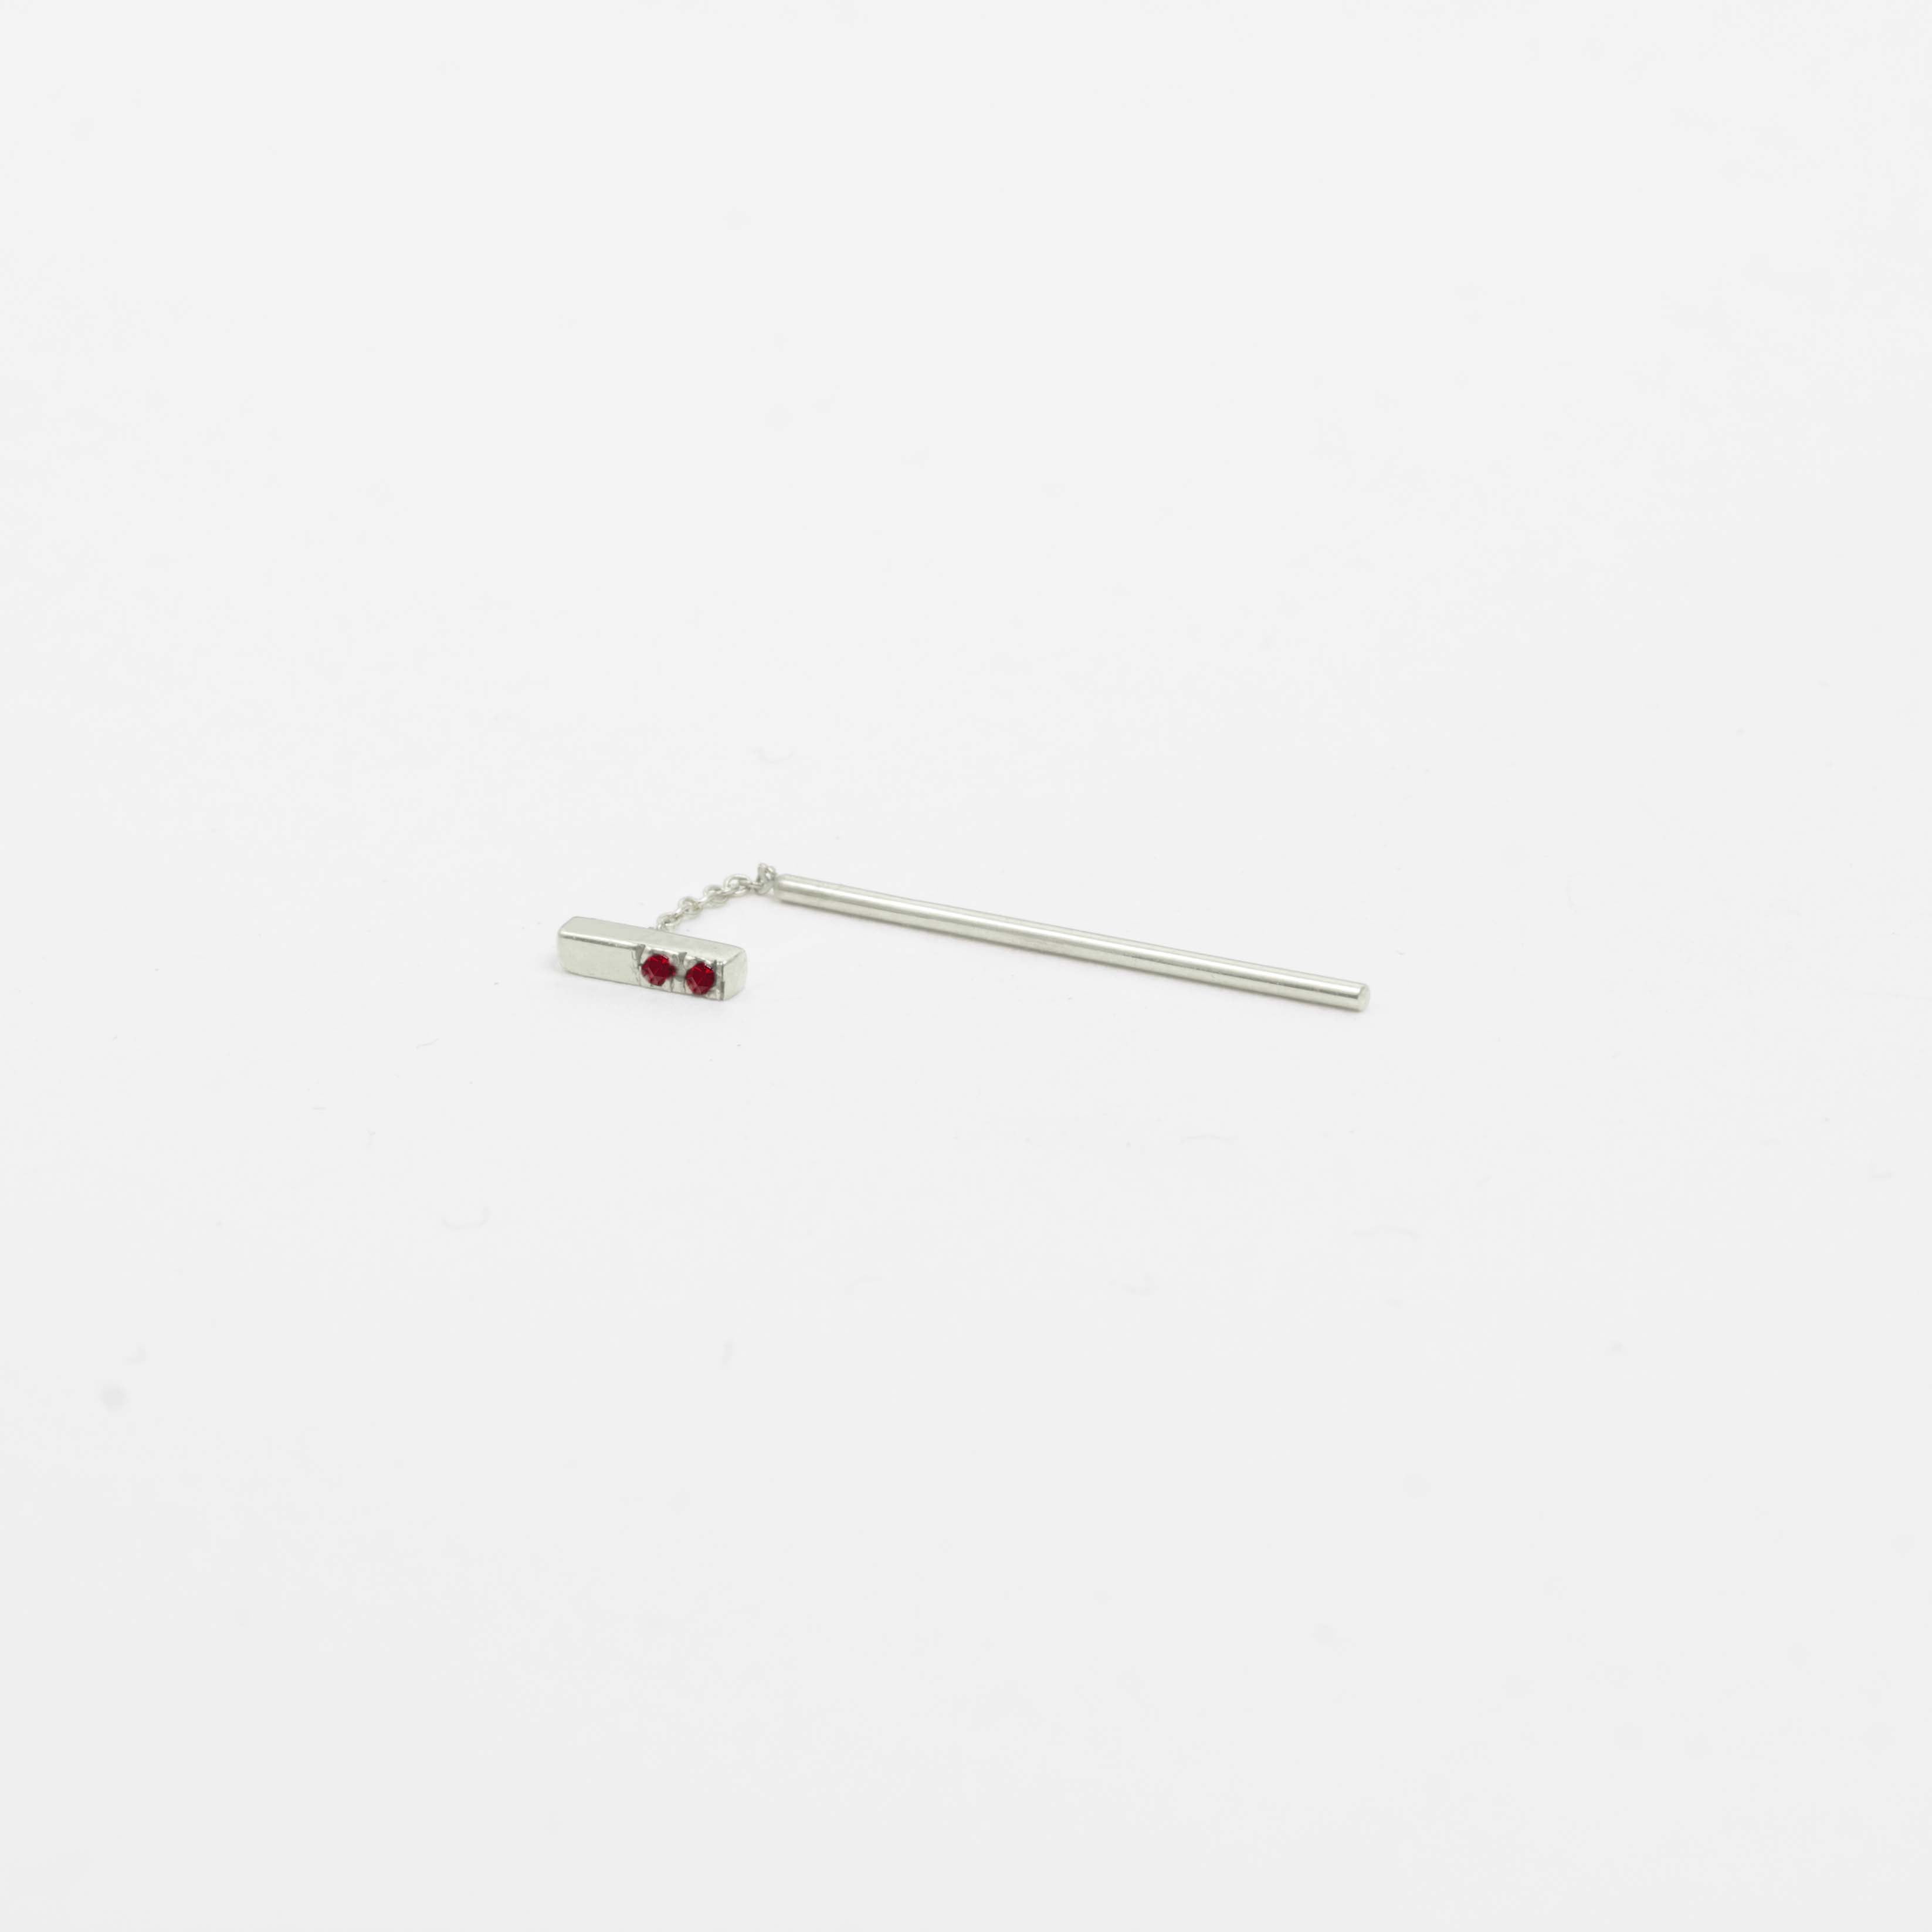 Olko Short Minimal Pull Through Earring in 14k White Gold set with Rubies By SHW Fine Jewelry New York City